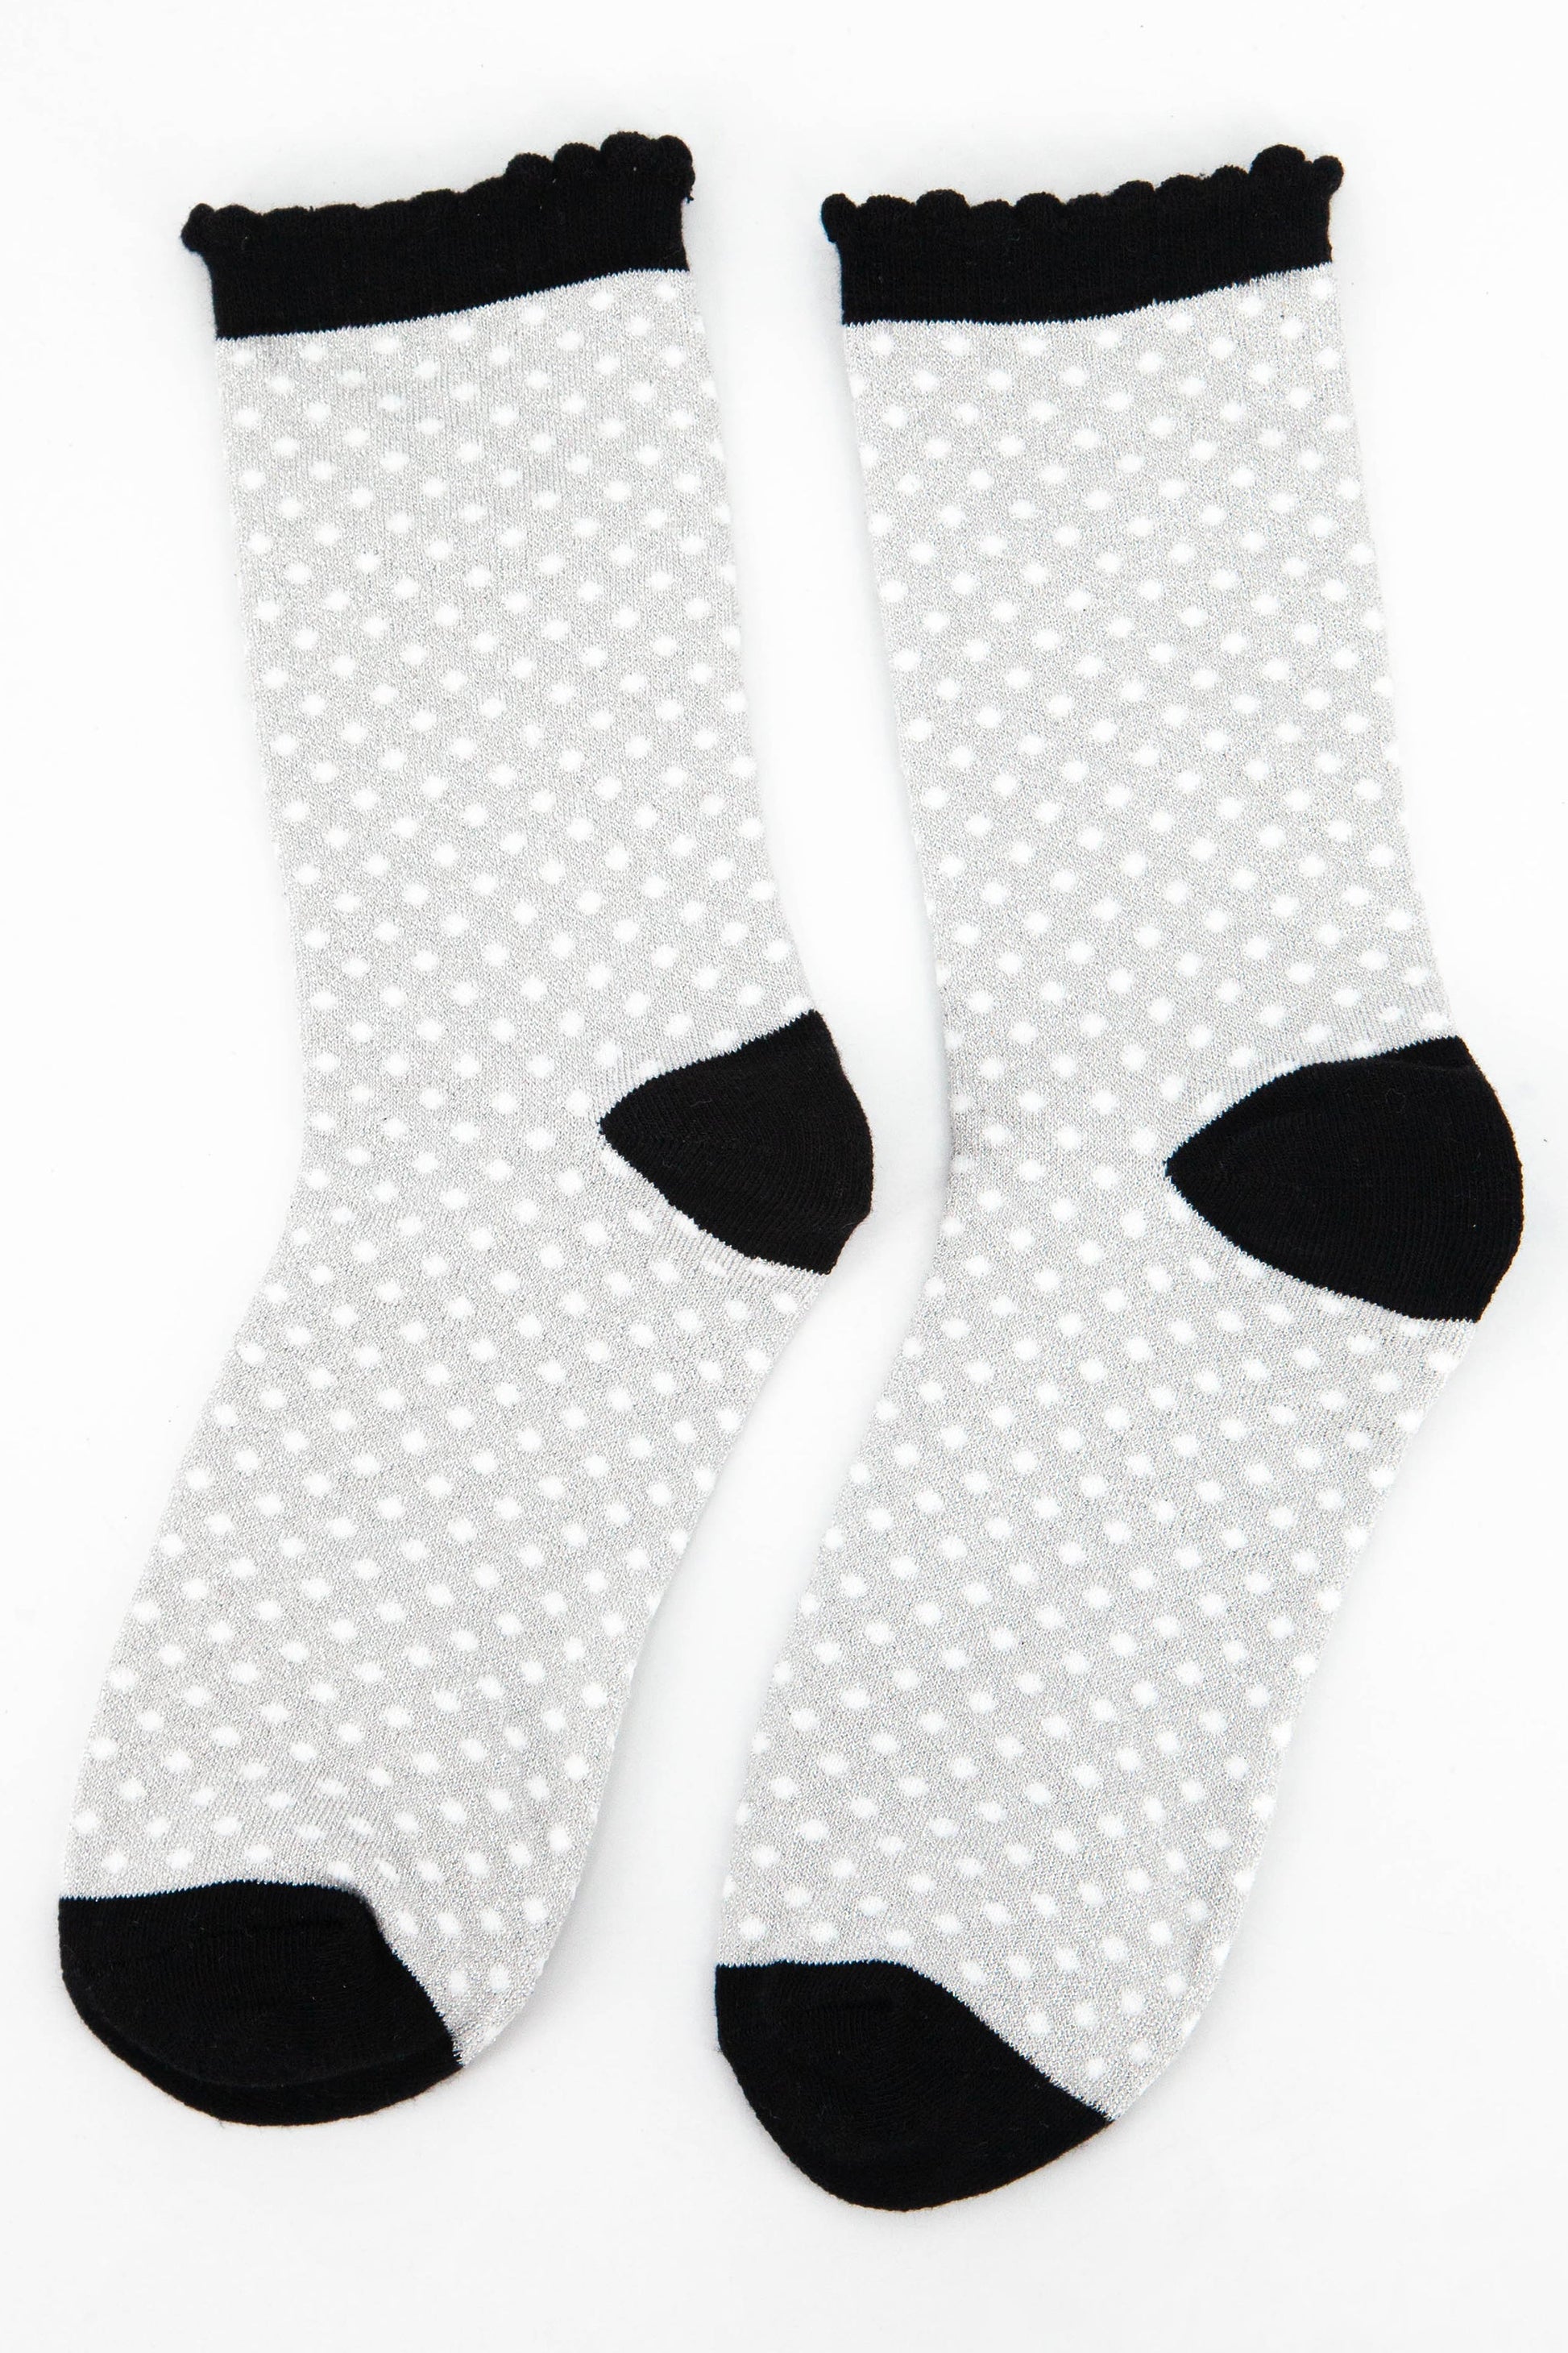 grey and black glitter ankle socks with an all over polka dot pattern and glitter shimmer